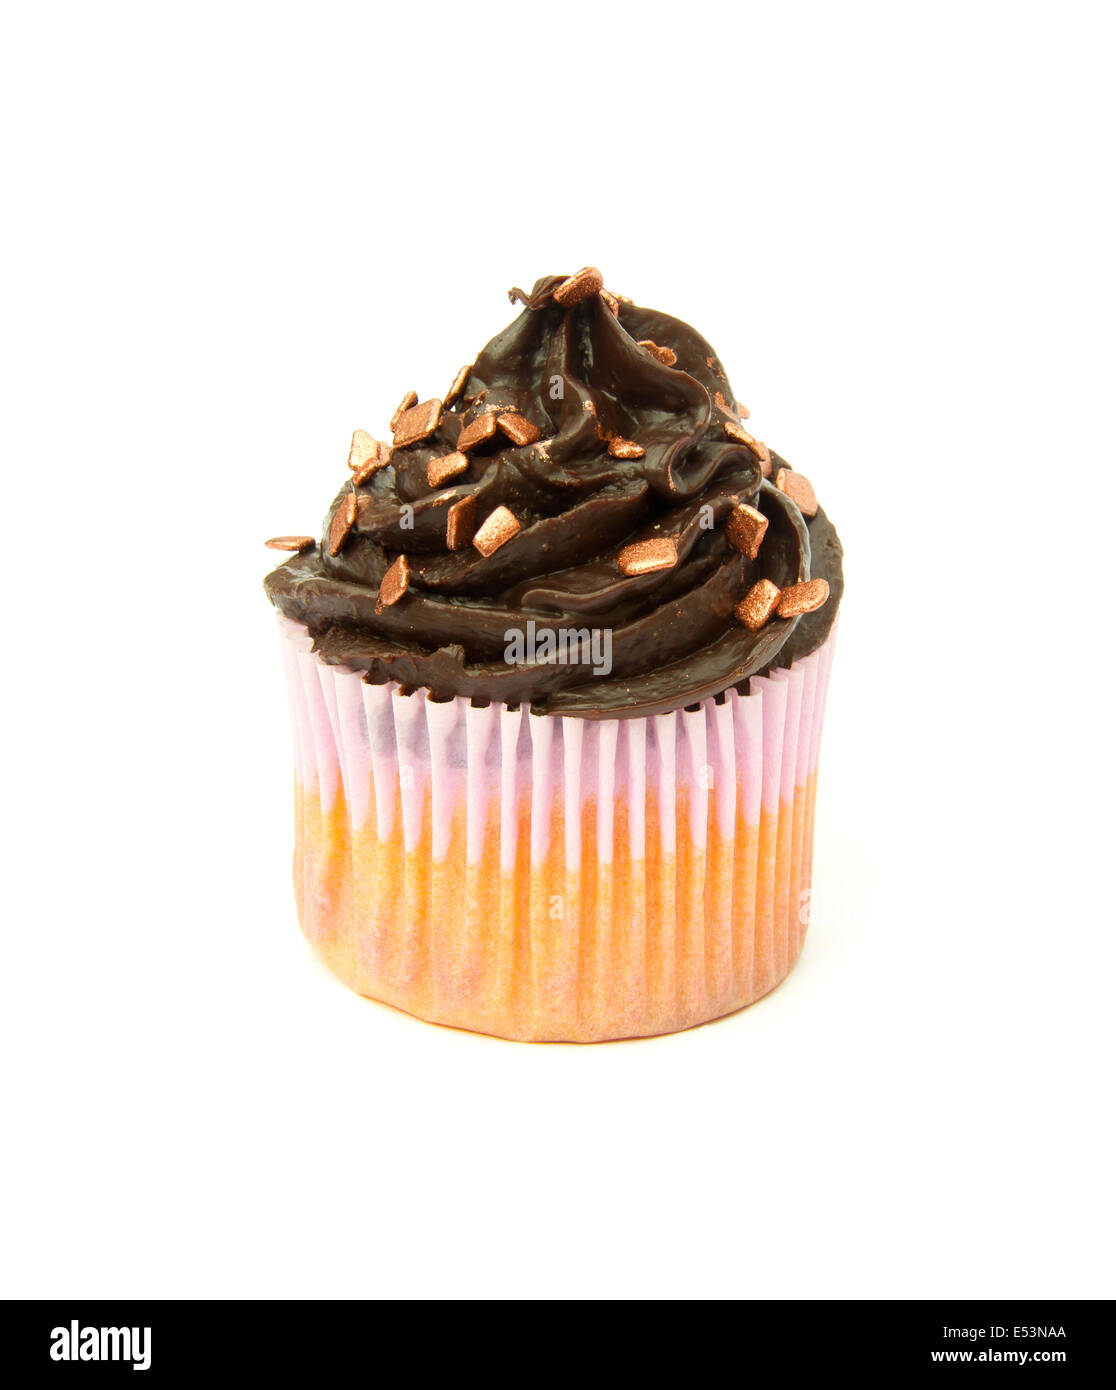 Gluten free cupcake with chocolate top with bronze sprinkles Stock Photo